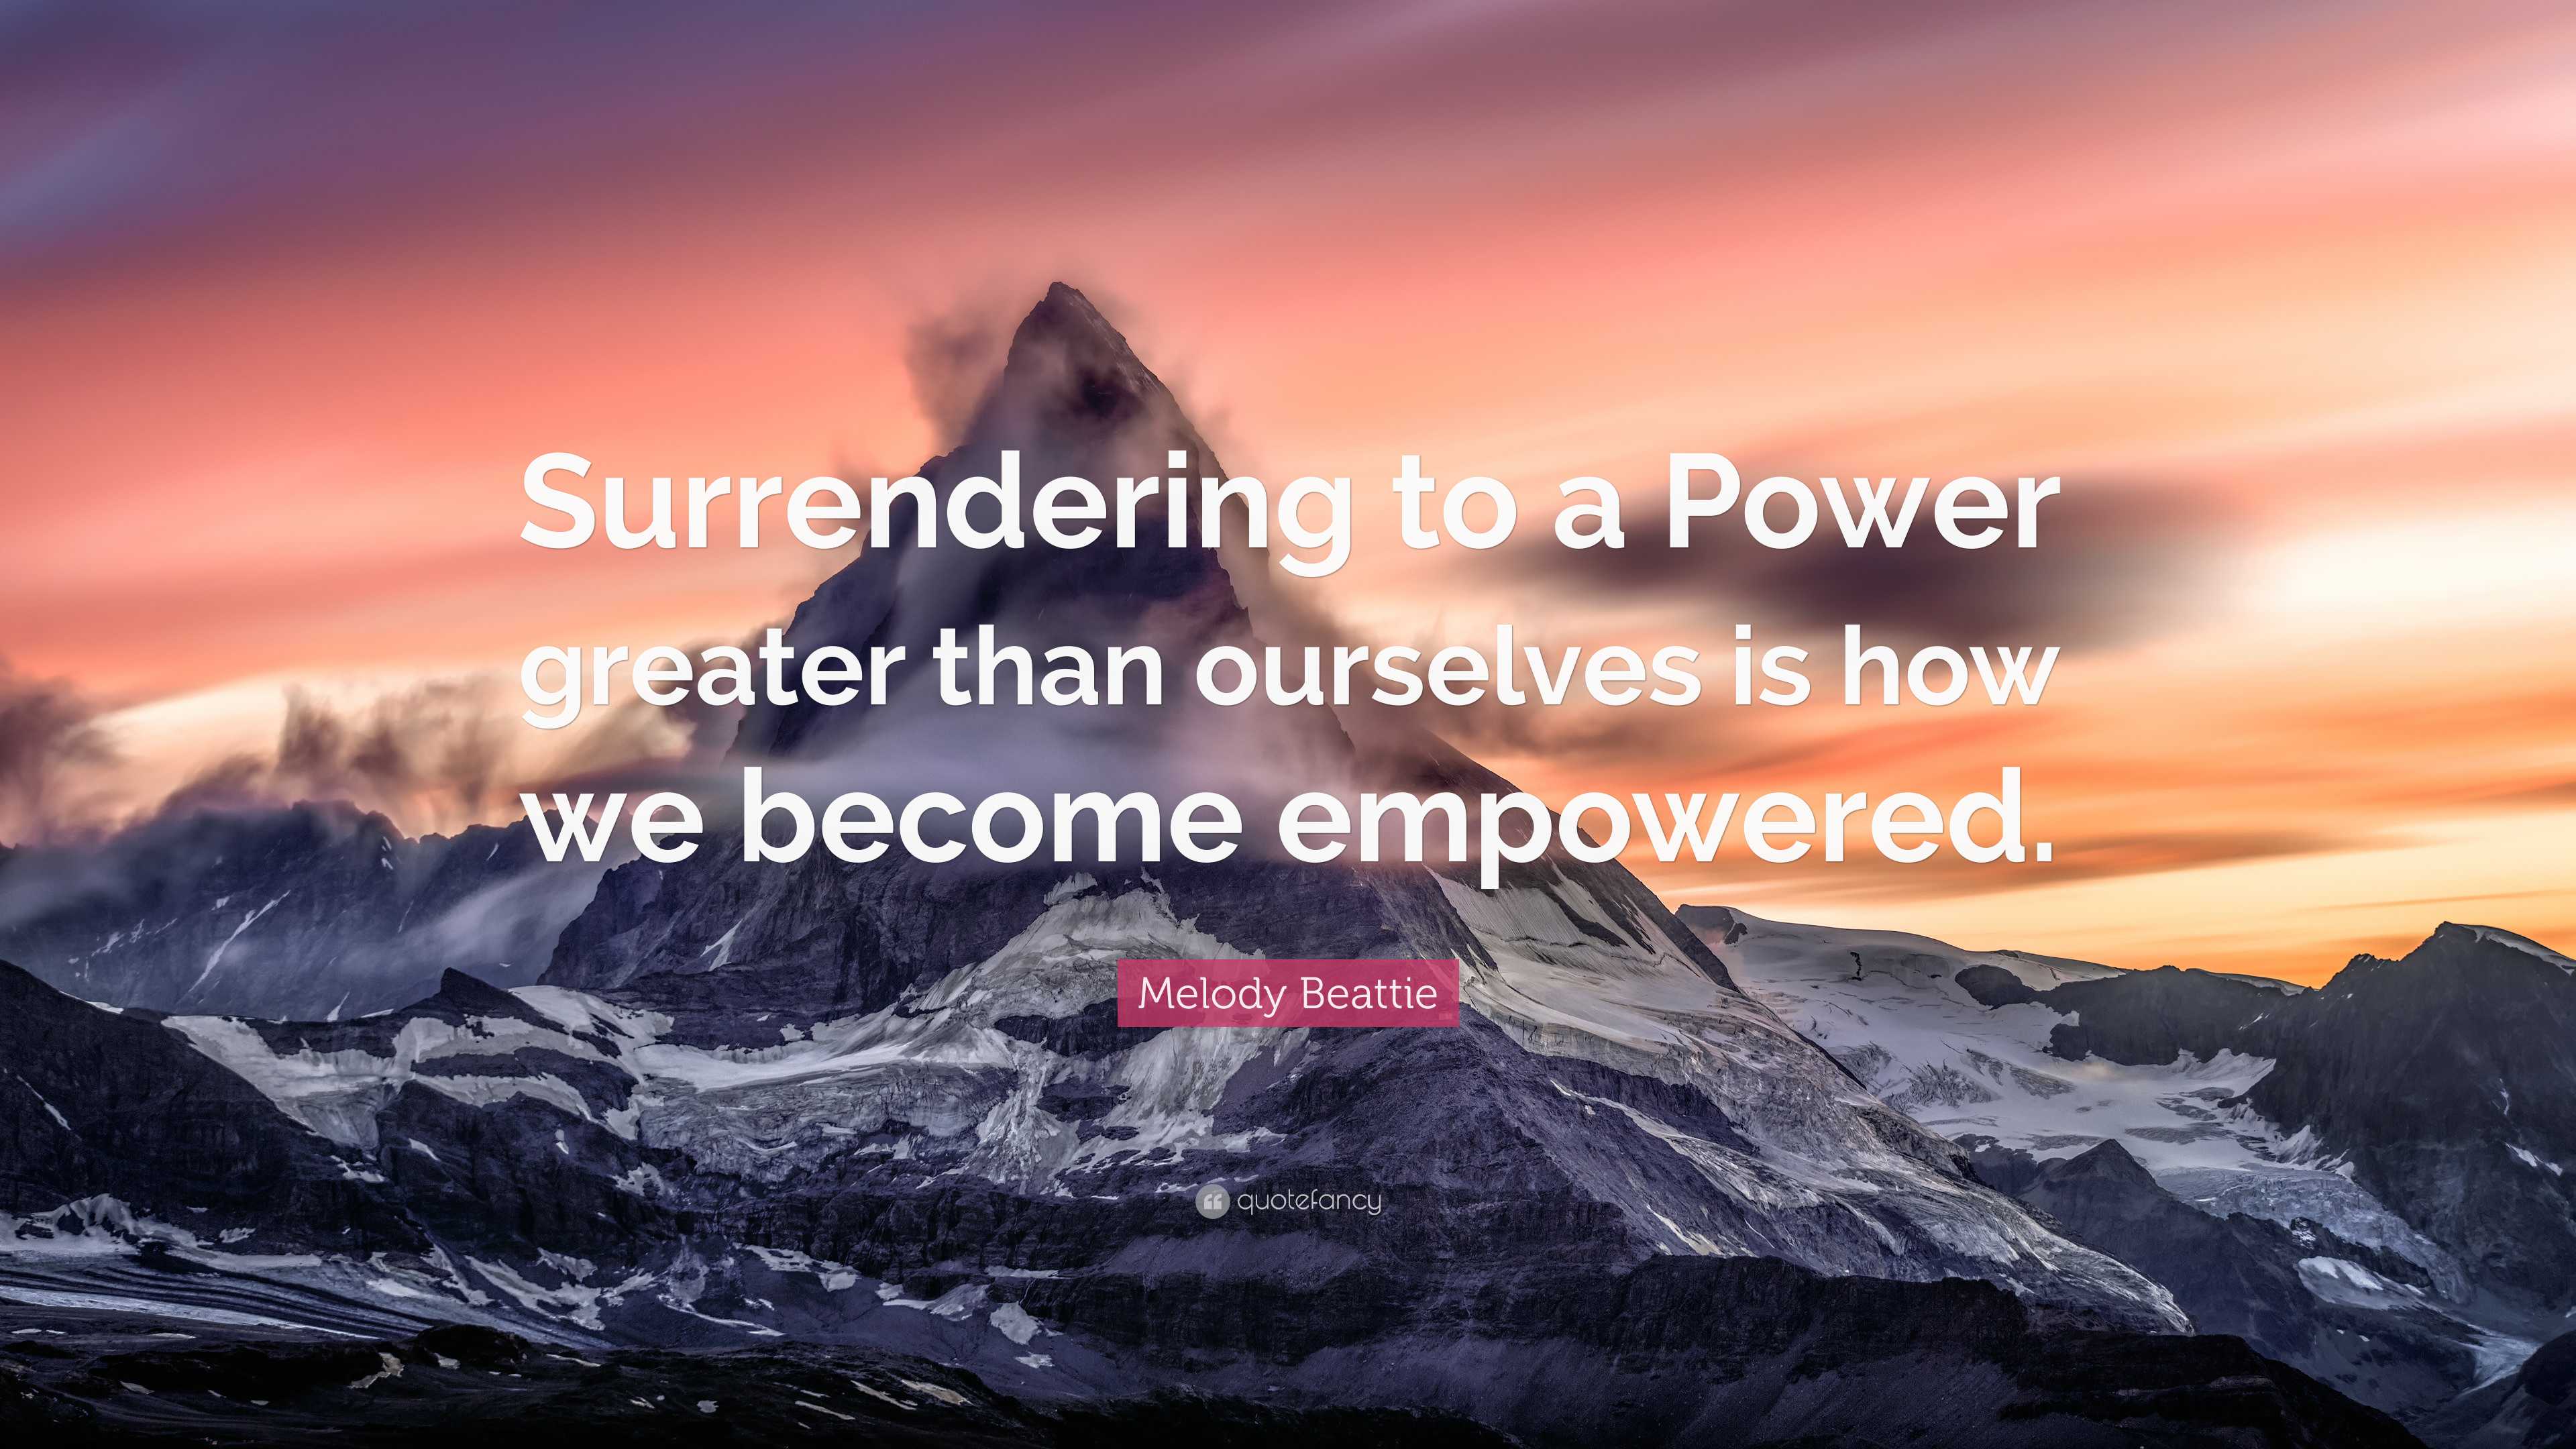 A Power Greater than Ourselves